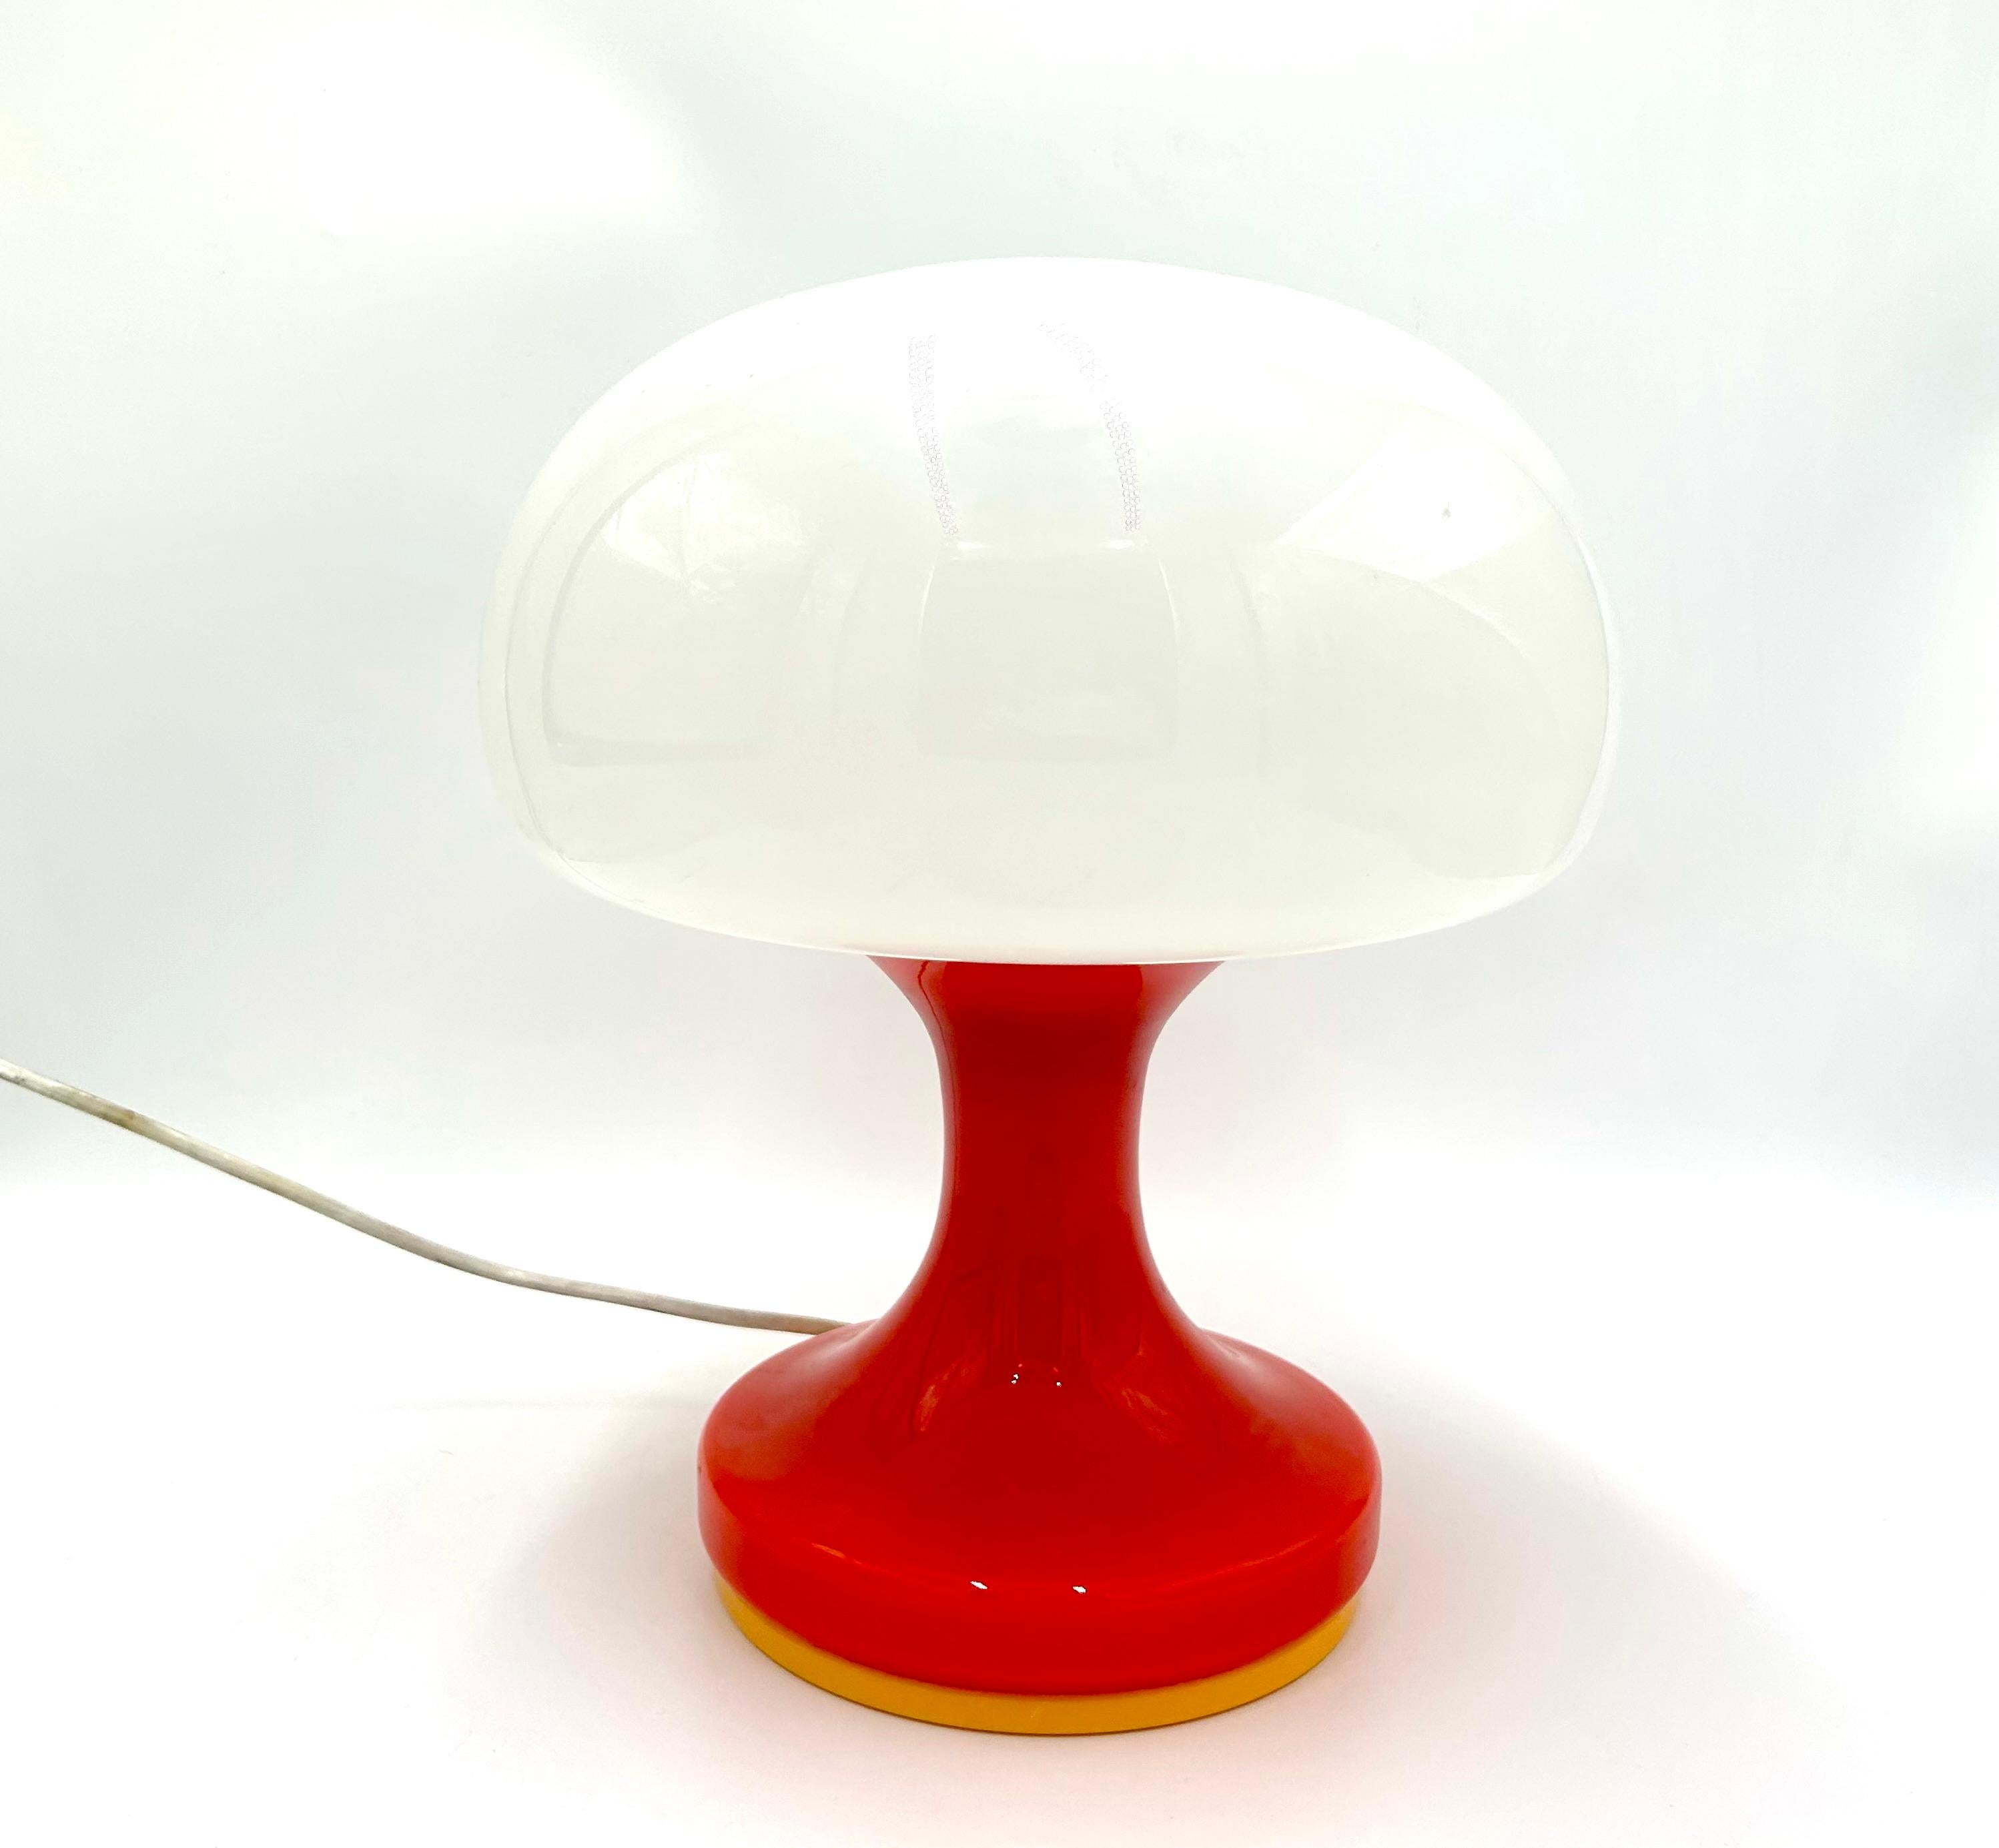 Red glass table lamp with a white shade designed by Stephan Tabera, produced by OPP Jihlava in Czechoslovakia around 1970. Very good condition without damage.
Efficient lamp, bulb E27 thread.
height: 30cm
diameter: 25cm